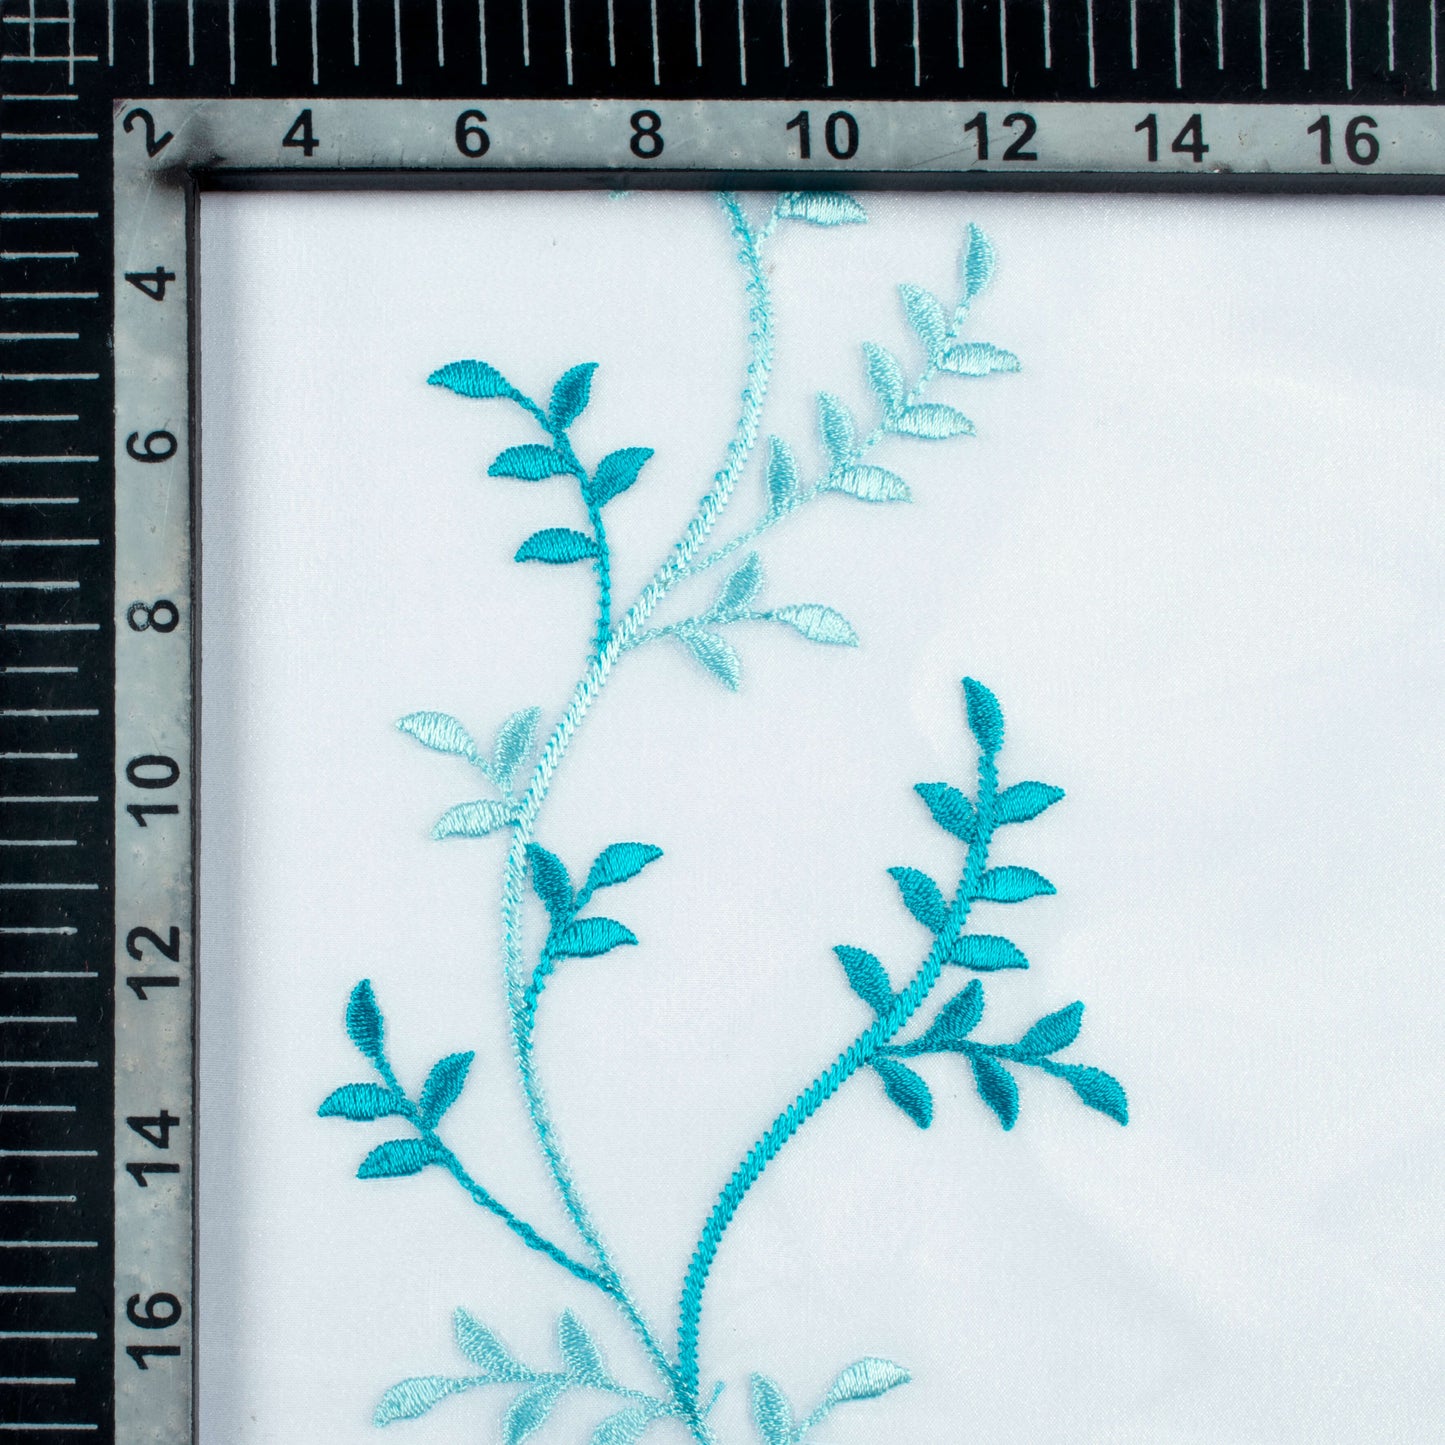 White And Teal Blue Embroidery Organza Tissue Premium Sheer Fabric (Width 48 Inches)